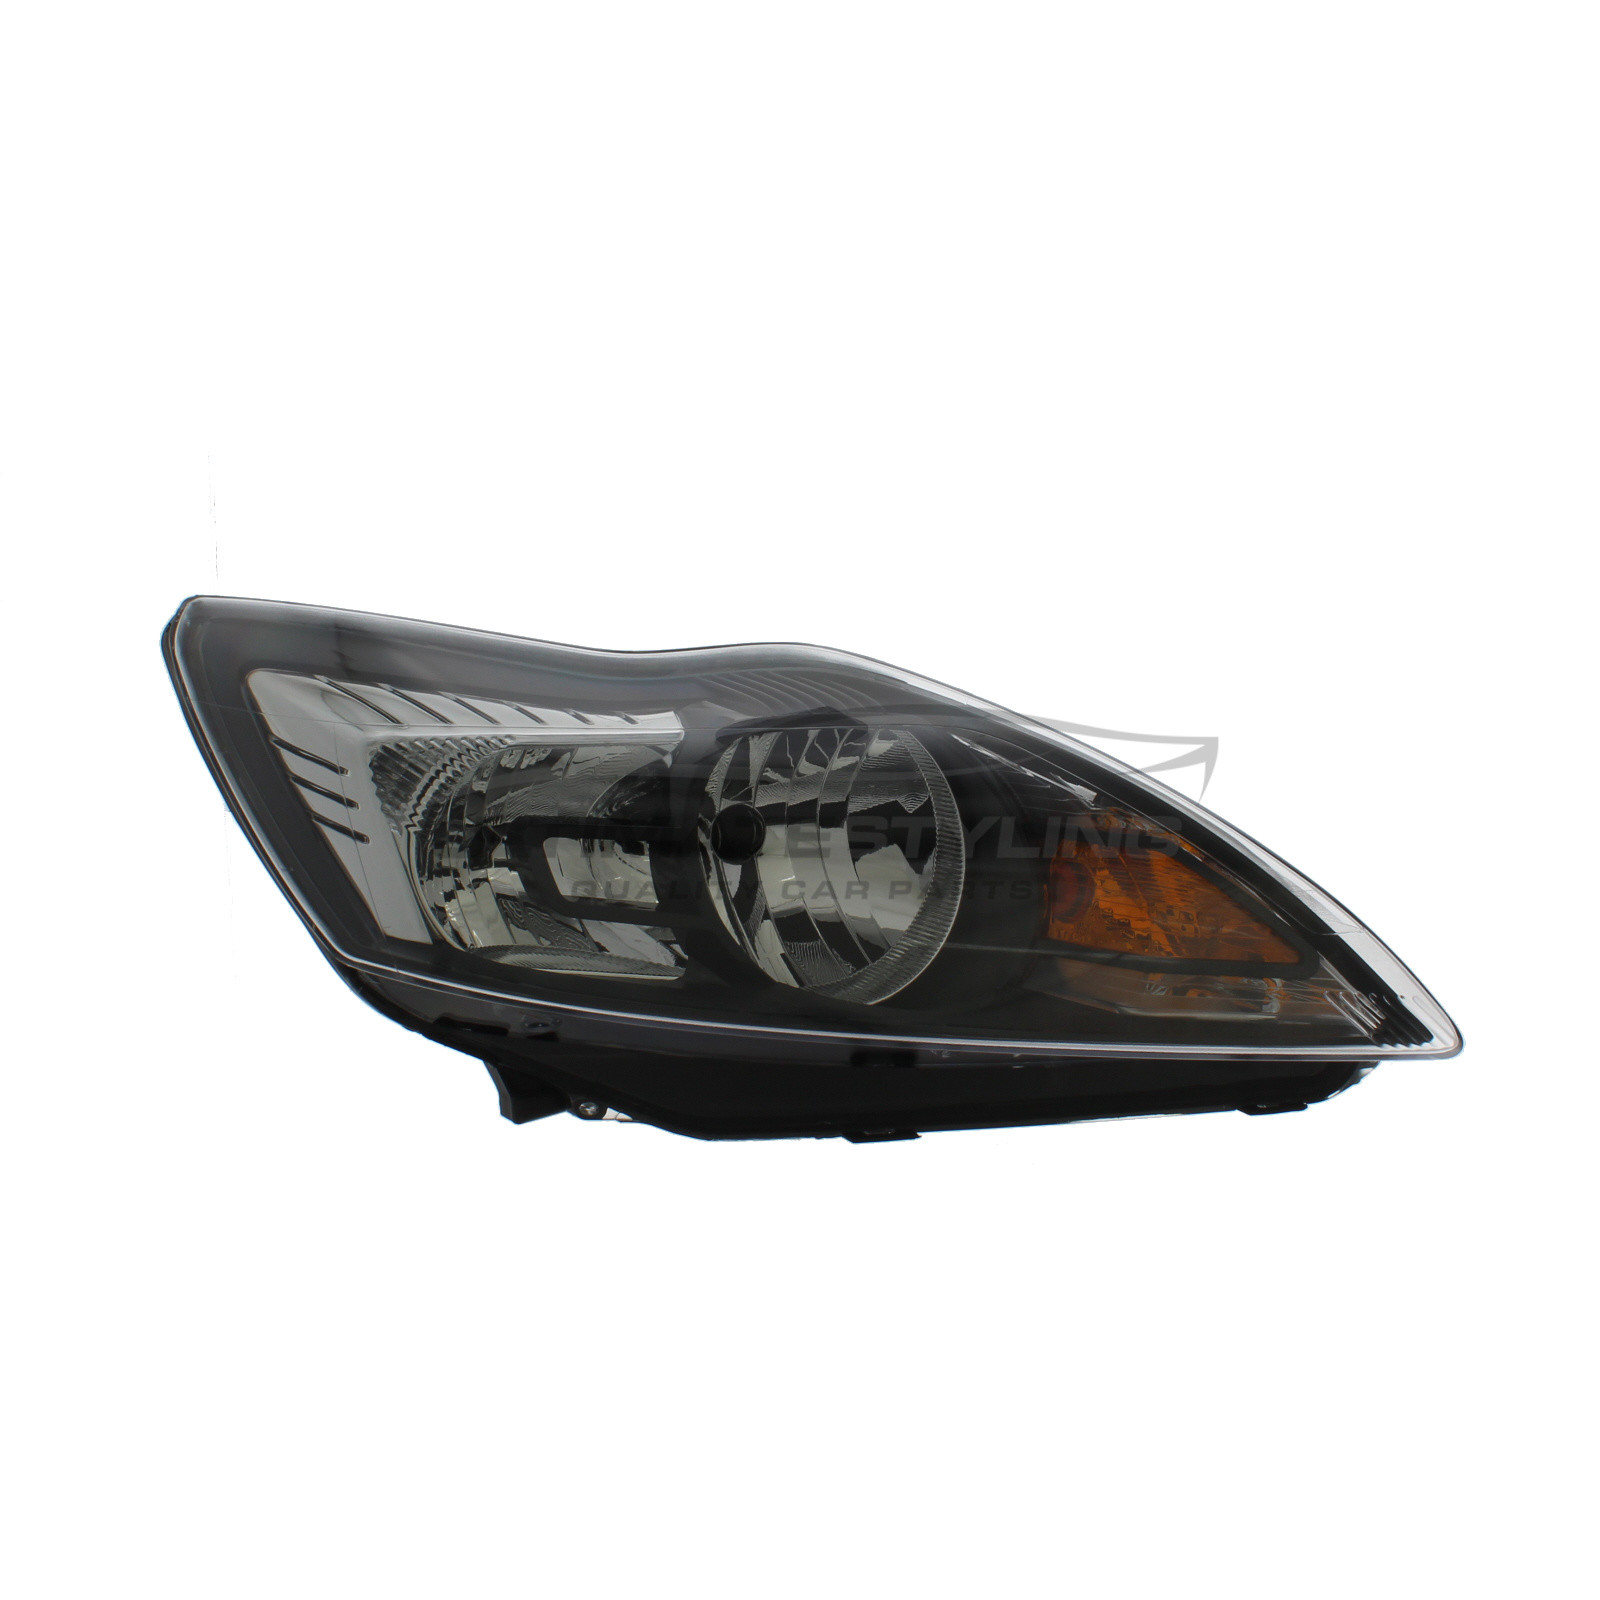 Ford Focus 2008-2011 Halogen, Electric With Motor, Black Headlight / Headlamp Including Chrome Insert Drivers Side (RH)